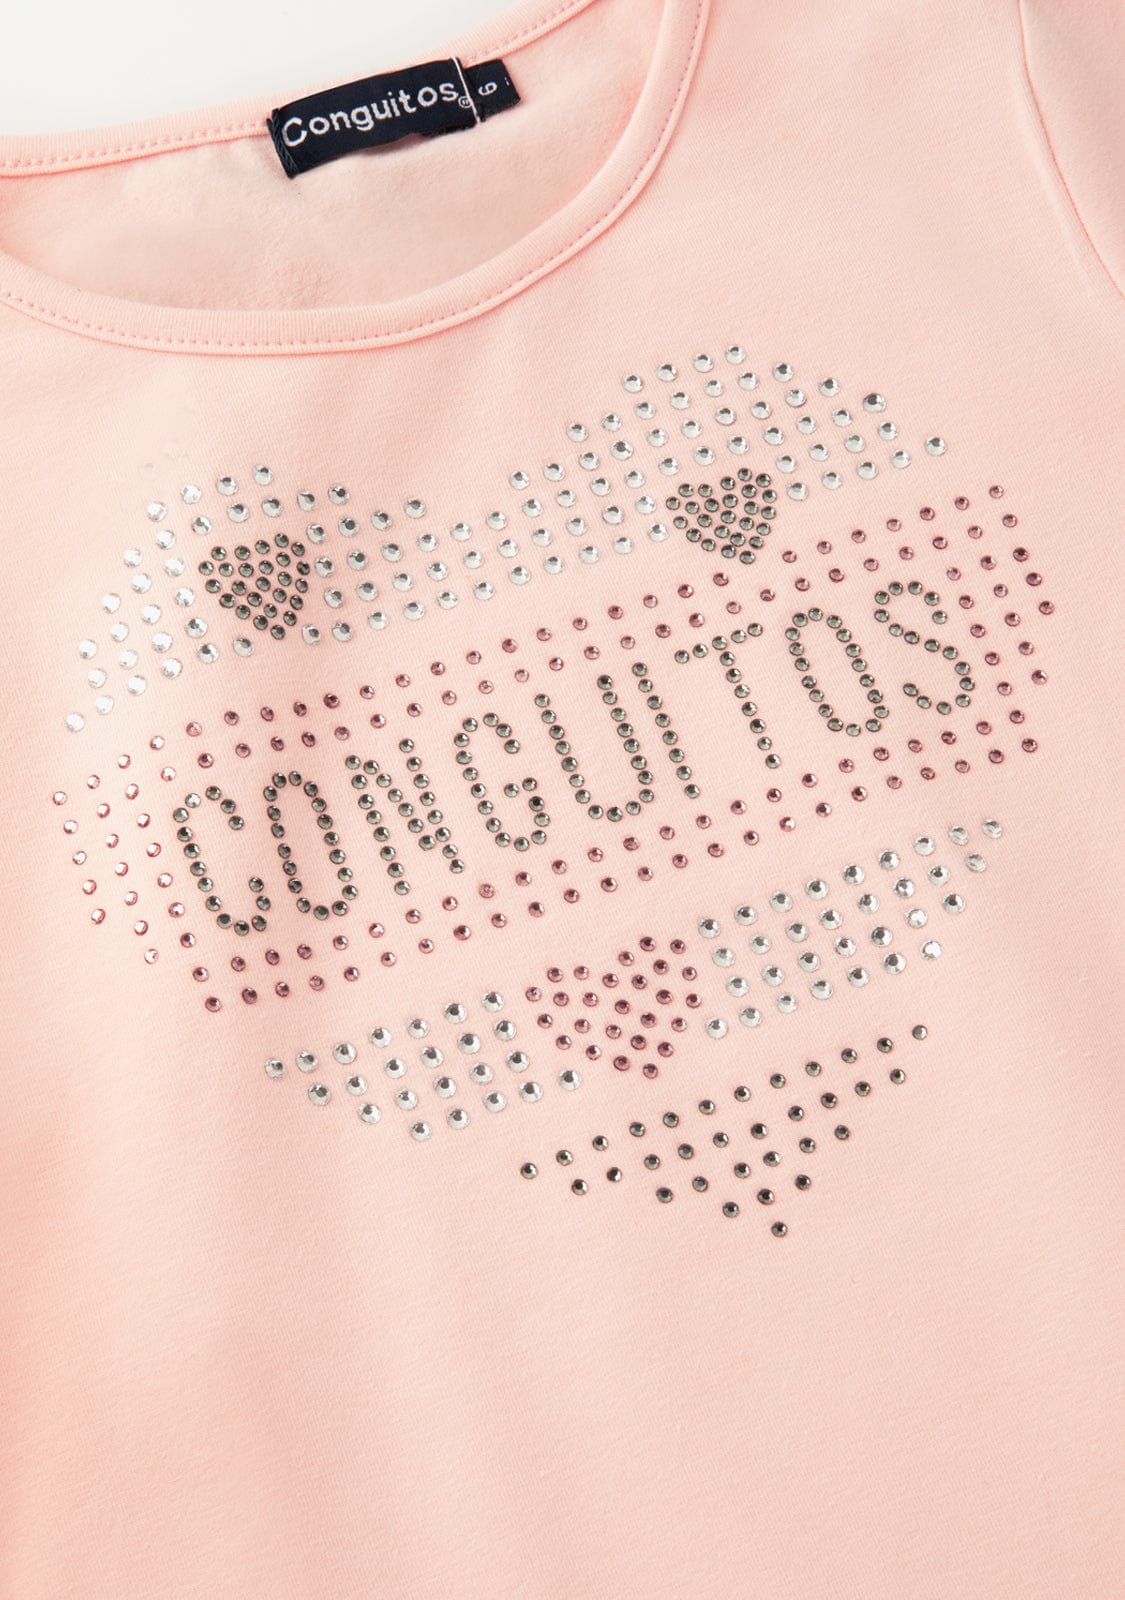 CONGUITOS TEXTIL Clothing Girl's Pink Heart Strass T-Shirt